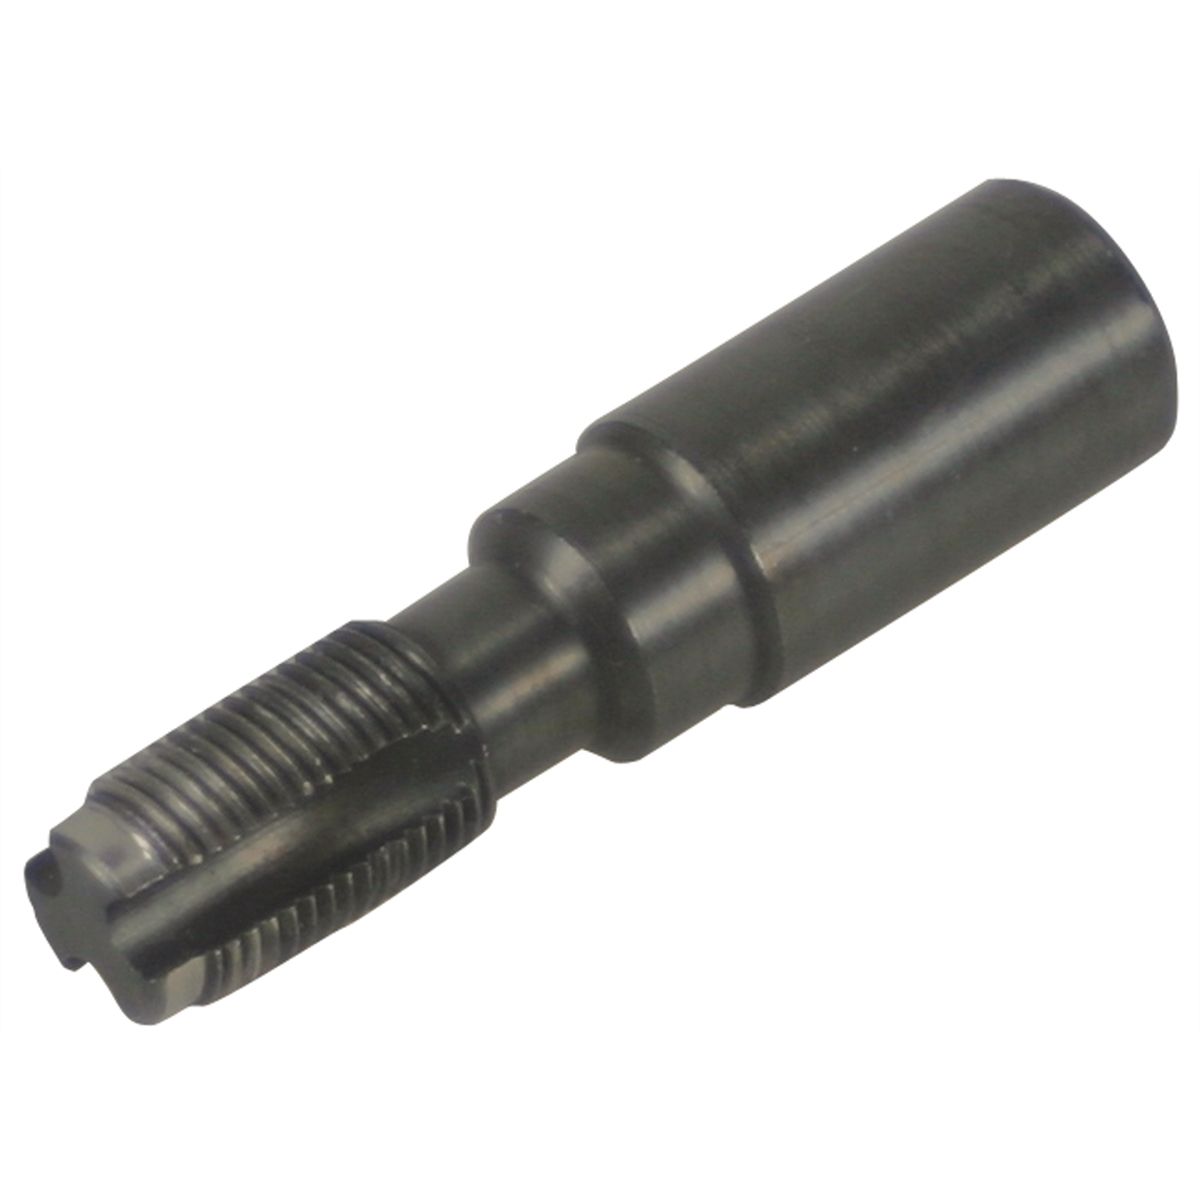 Limited Access Spark Plug Chaser - M14 x 1.25...